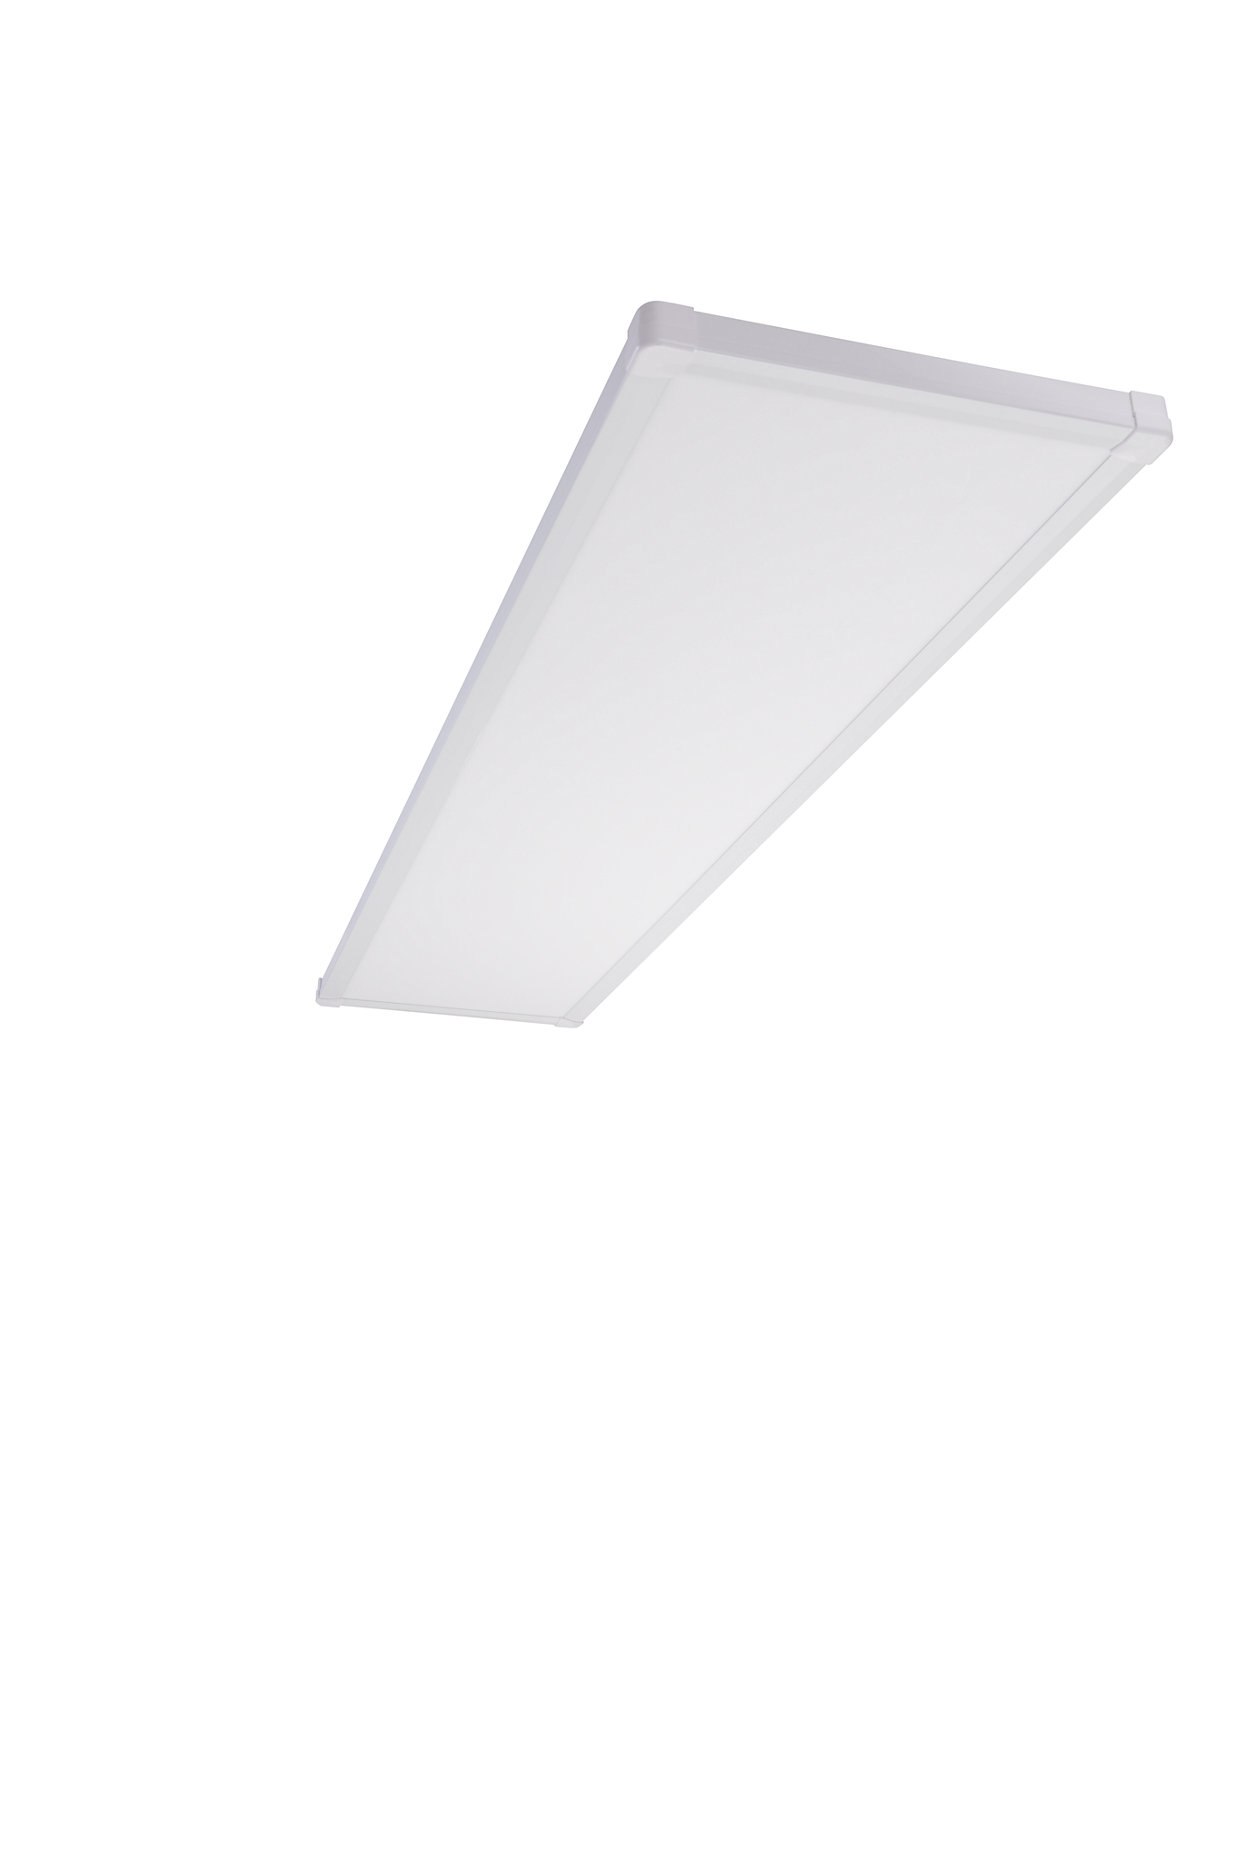 The new Philips Smartbright slim panel offers exceptional value. It is perfect for your everyday ceiling lighting installations. It is available in three standard sizes and two different CCT options to suit your needs.